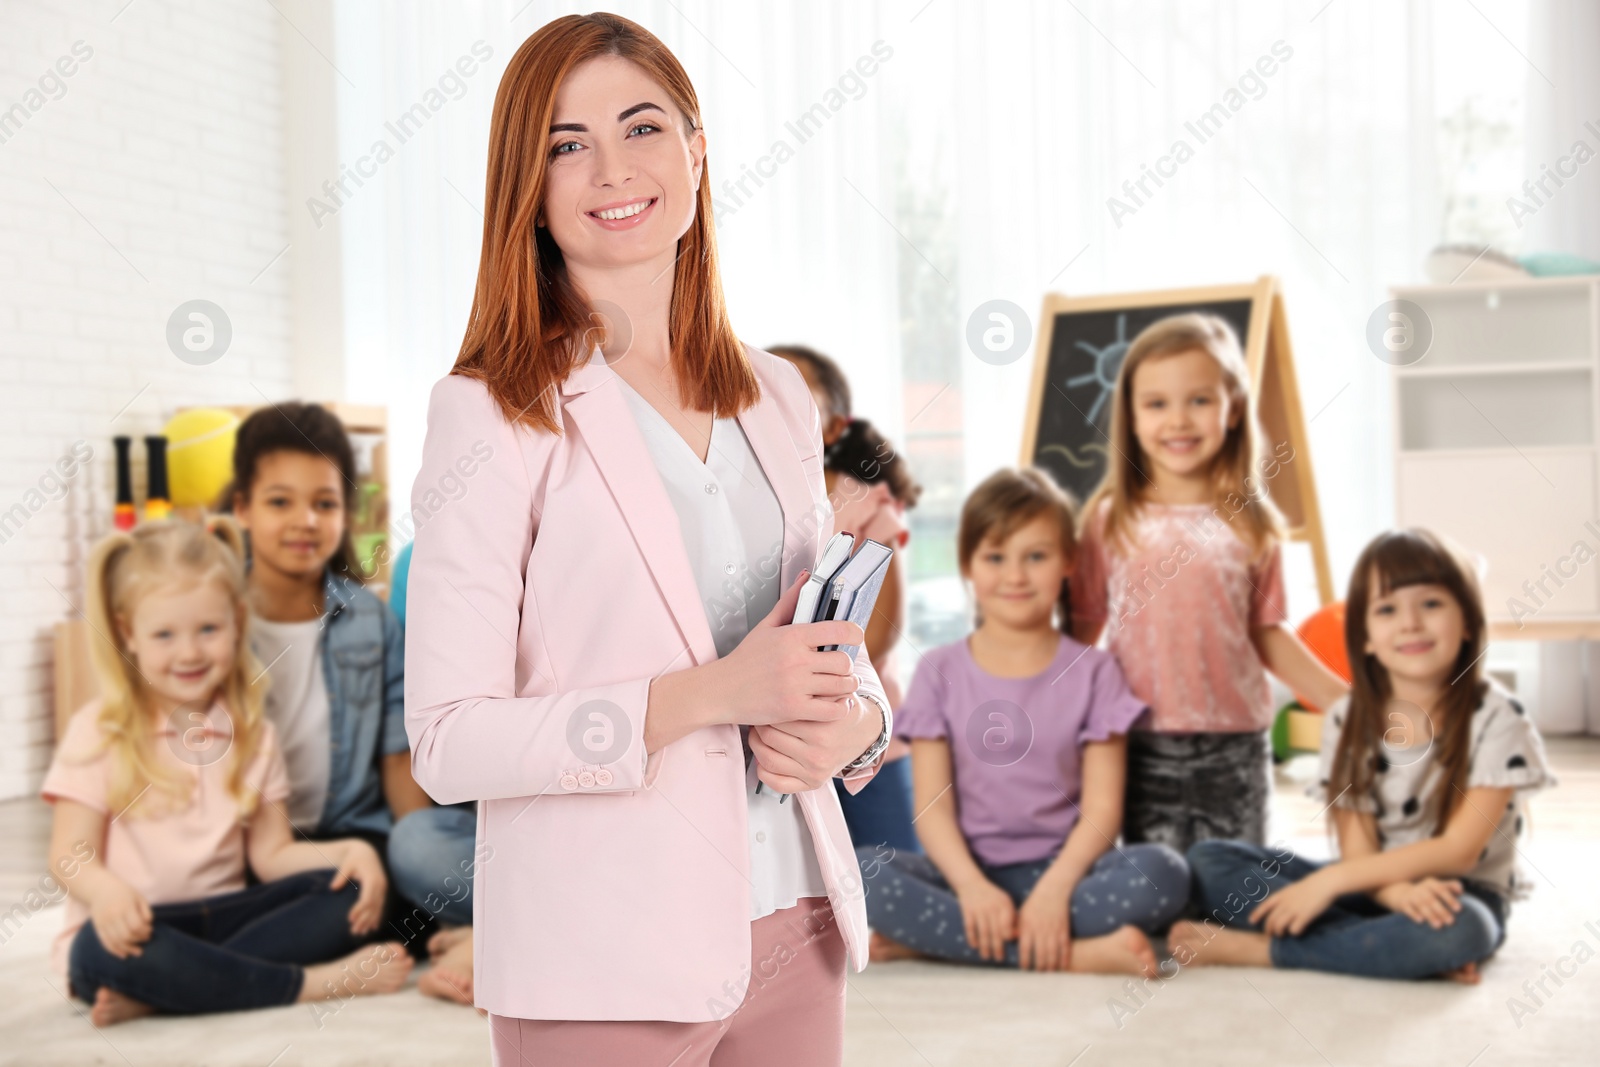 Image of Happy woman in spacious classroom with kids